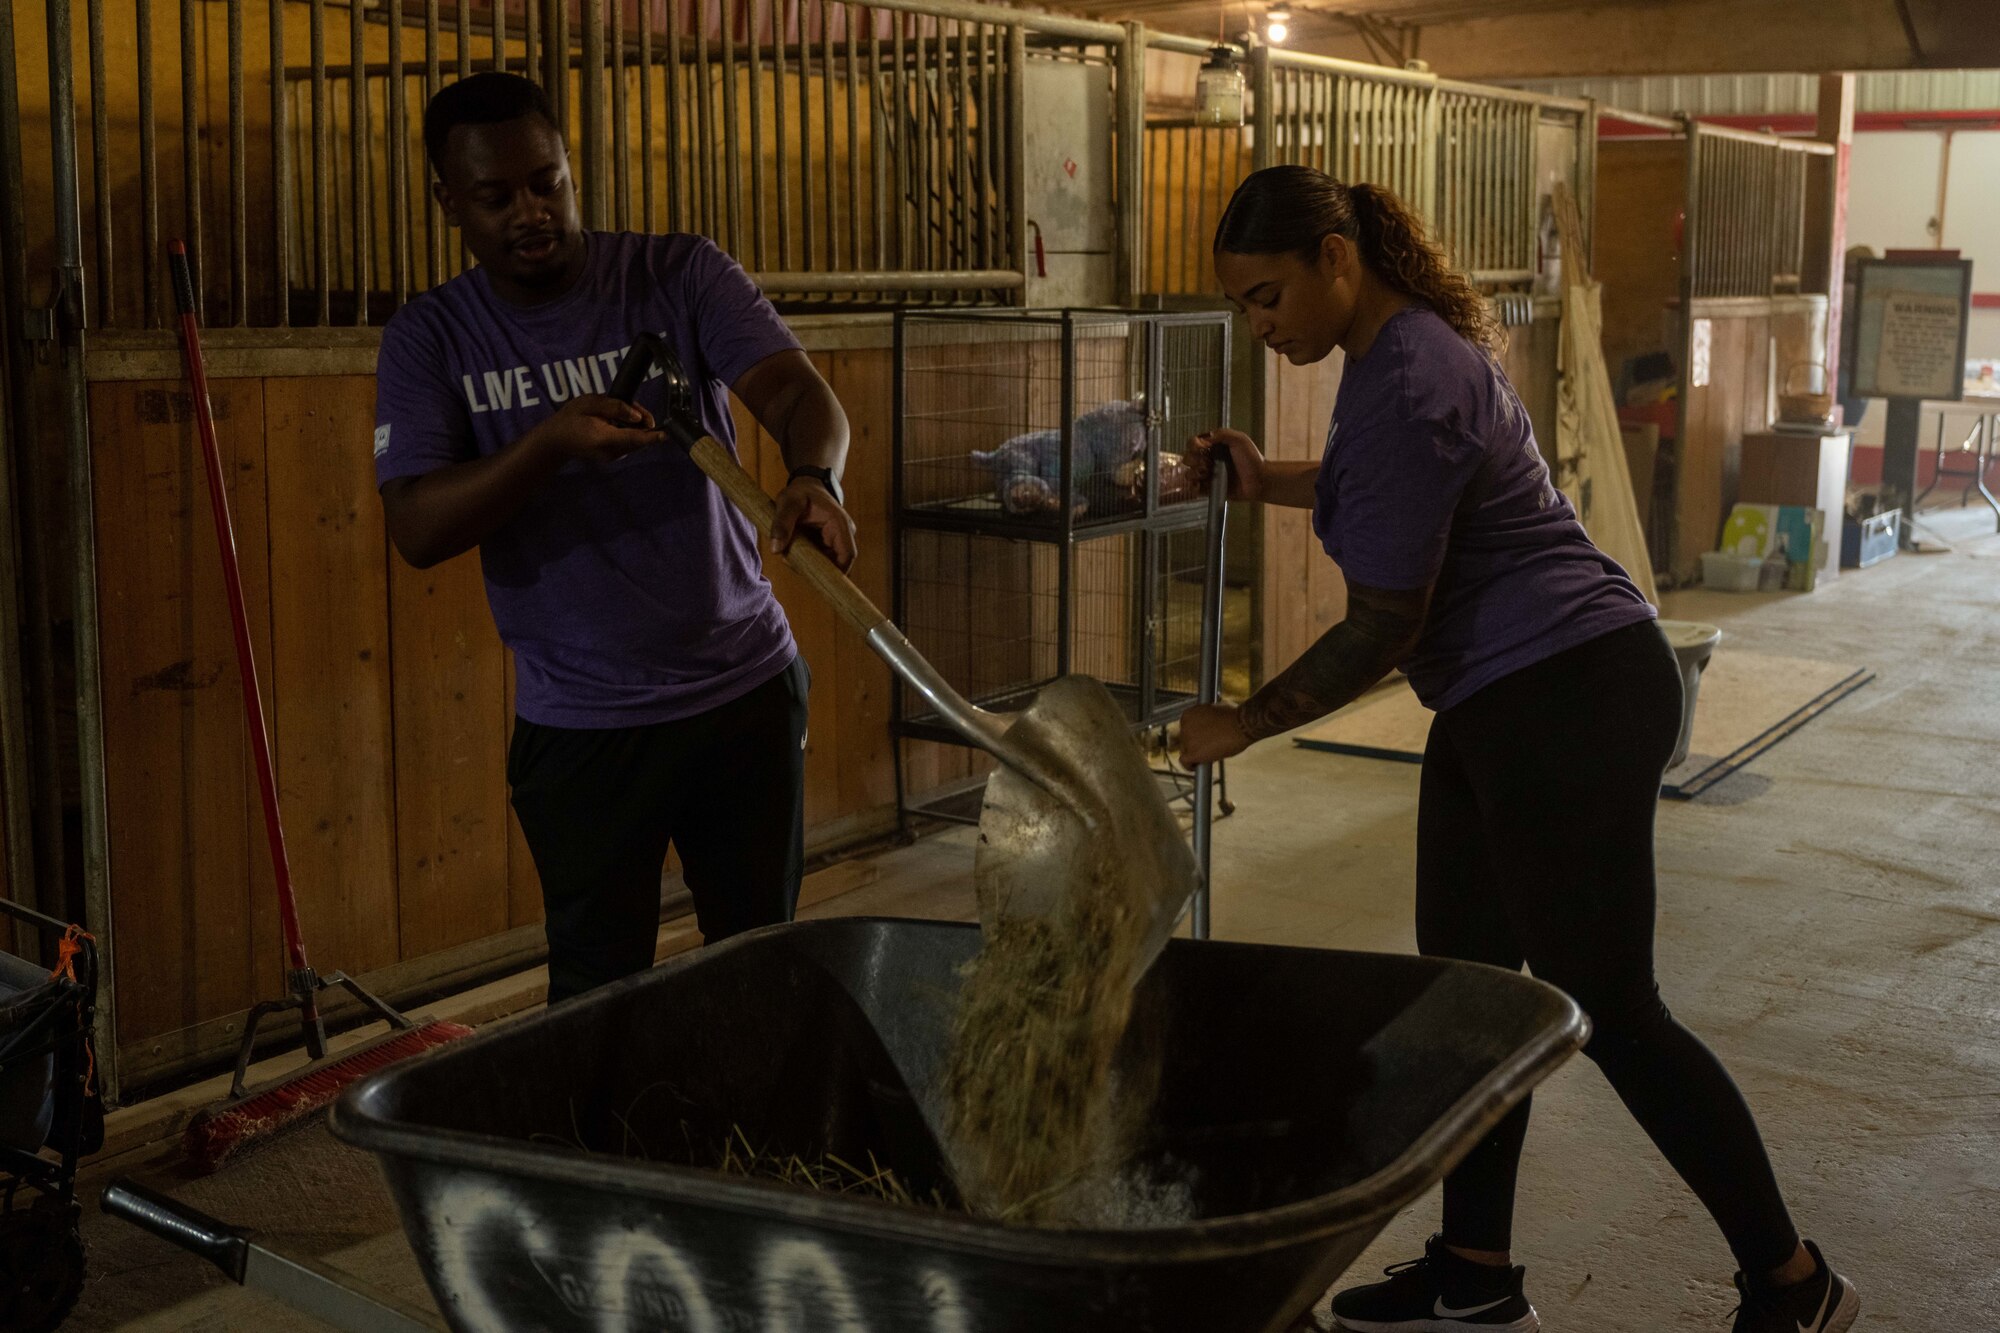 Airman 1st Class Jarvis Jackson (Left) and Airman 1st Class Chantelle Williams from the 34th Bomb Squadron on Ellsworth Air Force Base, clean horse stables at The Barn in Rapid City, South Dakota, Sept. 7, 2023. Many squadrons on Ellsworth including the 34th BS, the 89th Attack Squadron, 28th Munitions Squadron, 28th Operations Support Squadron and the 28th Maintenance Squadron participated for various volunteer opportunities in the community. (U.S. Air Force photo by Spc3 Adam Olson)